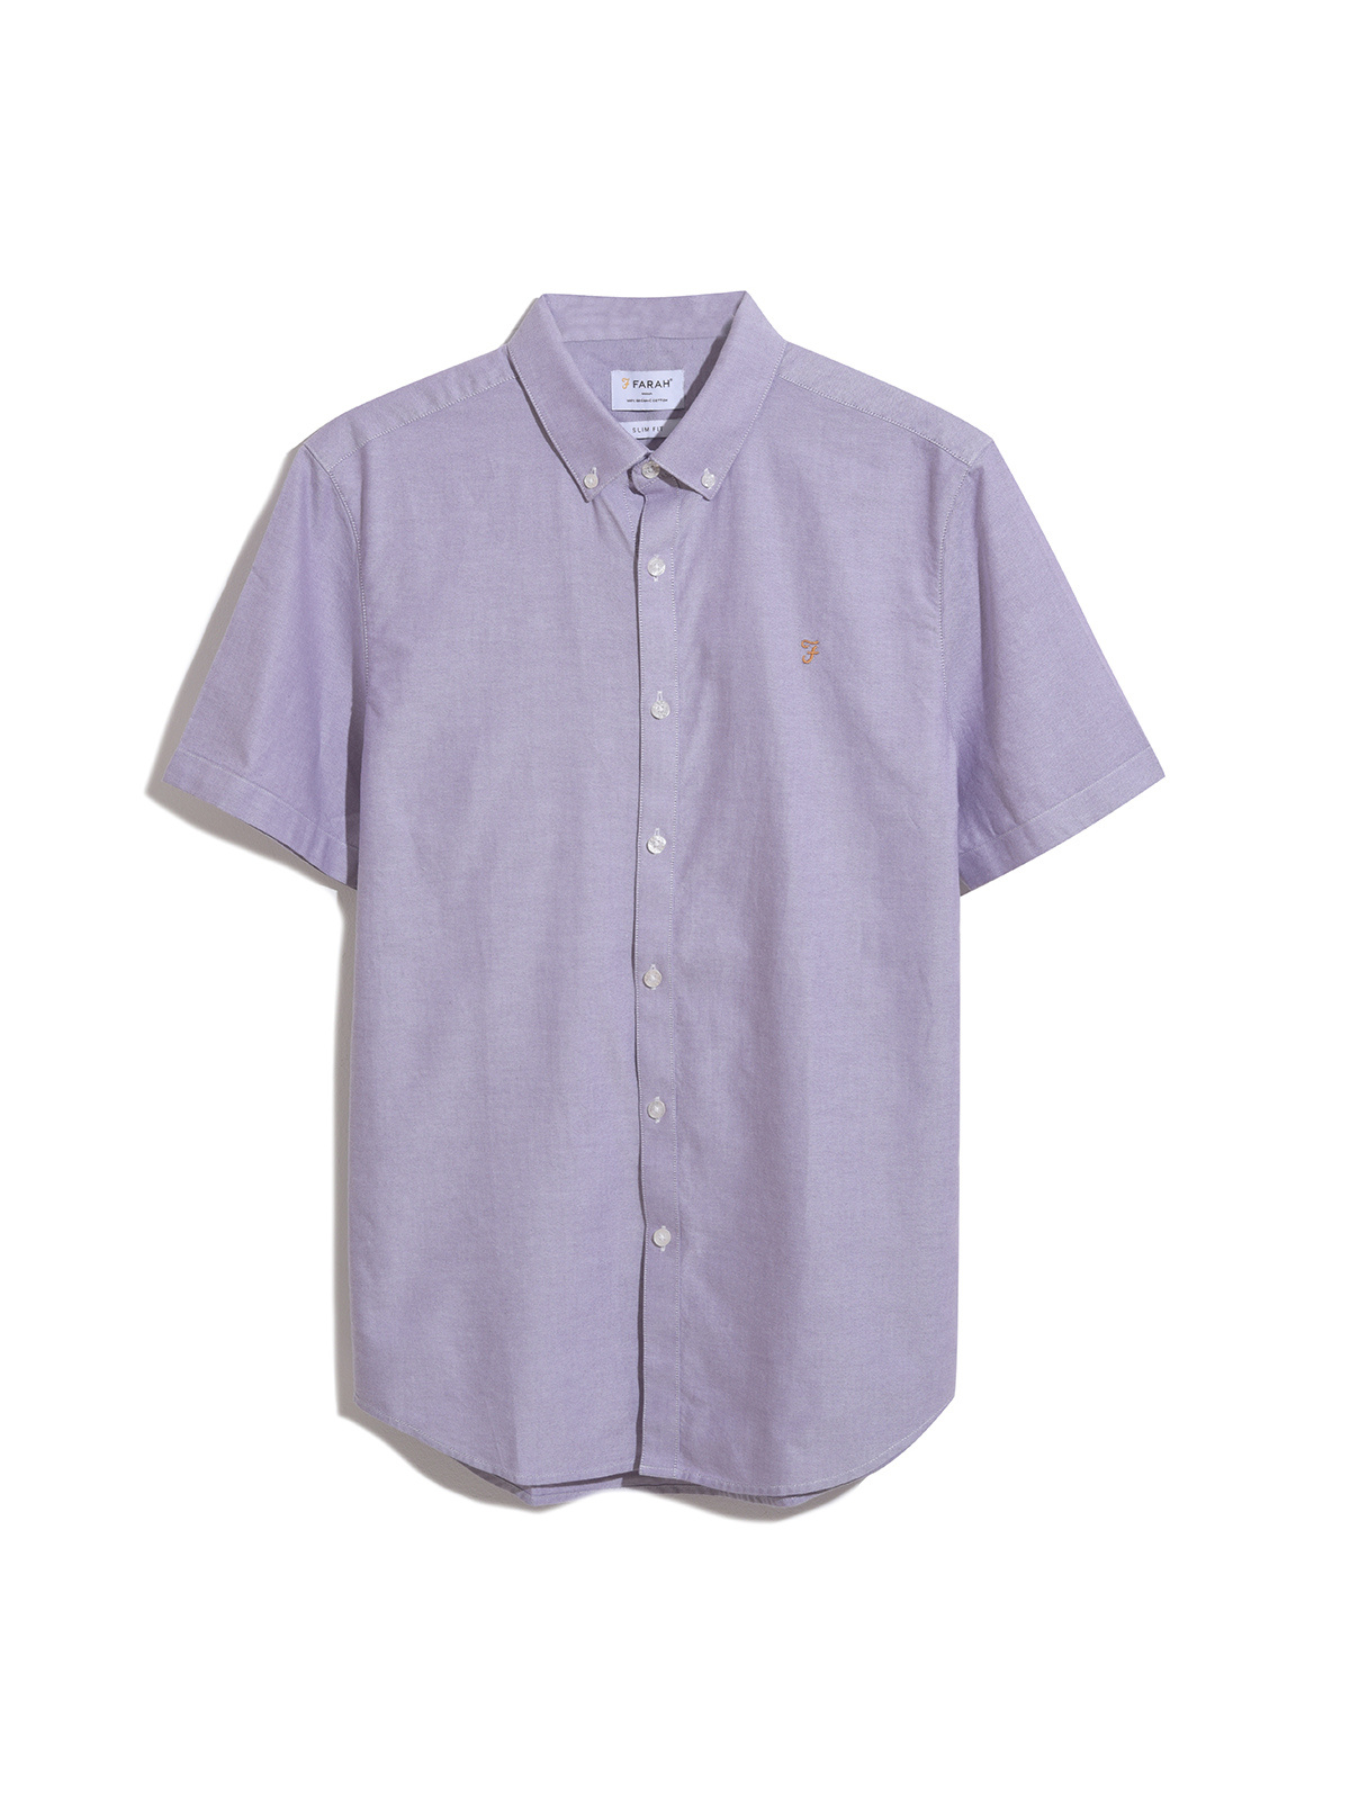 View Brewer Short Sleeve Shirt In Slate Purple information